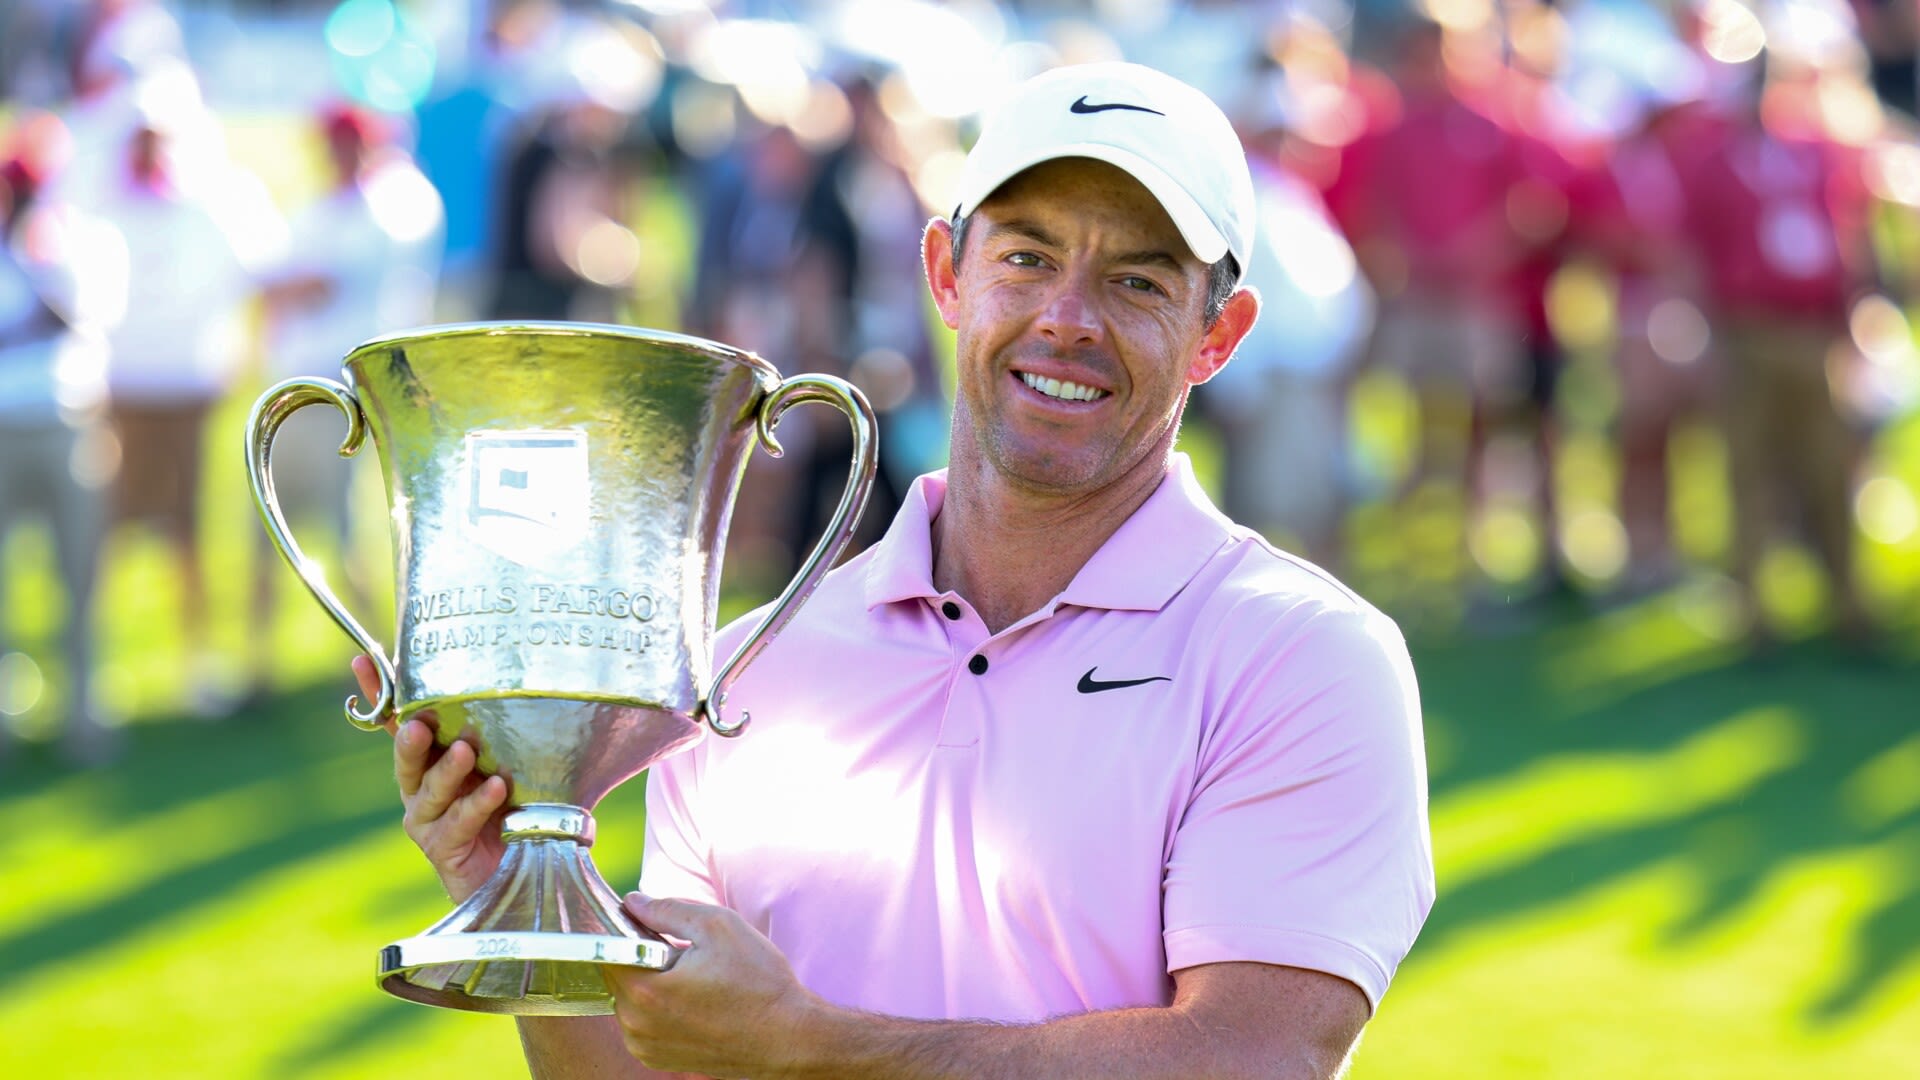 Rory McIlroy cruises to fourth Wells Fargo win, eyes fifth major at PGA Championship